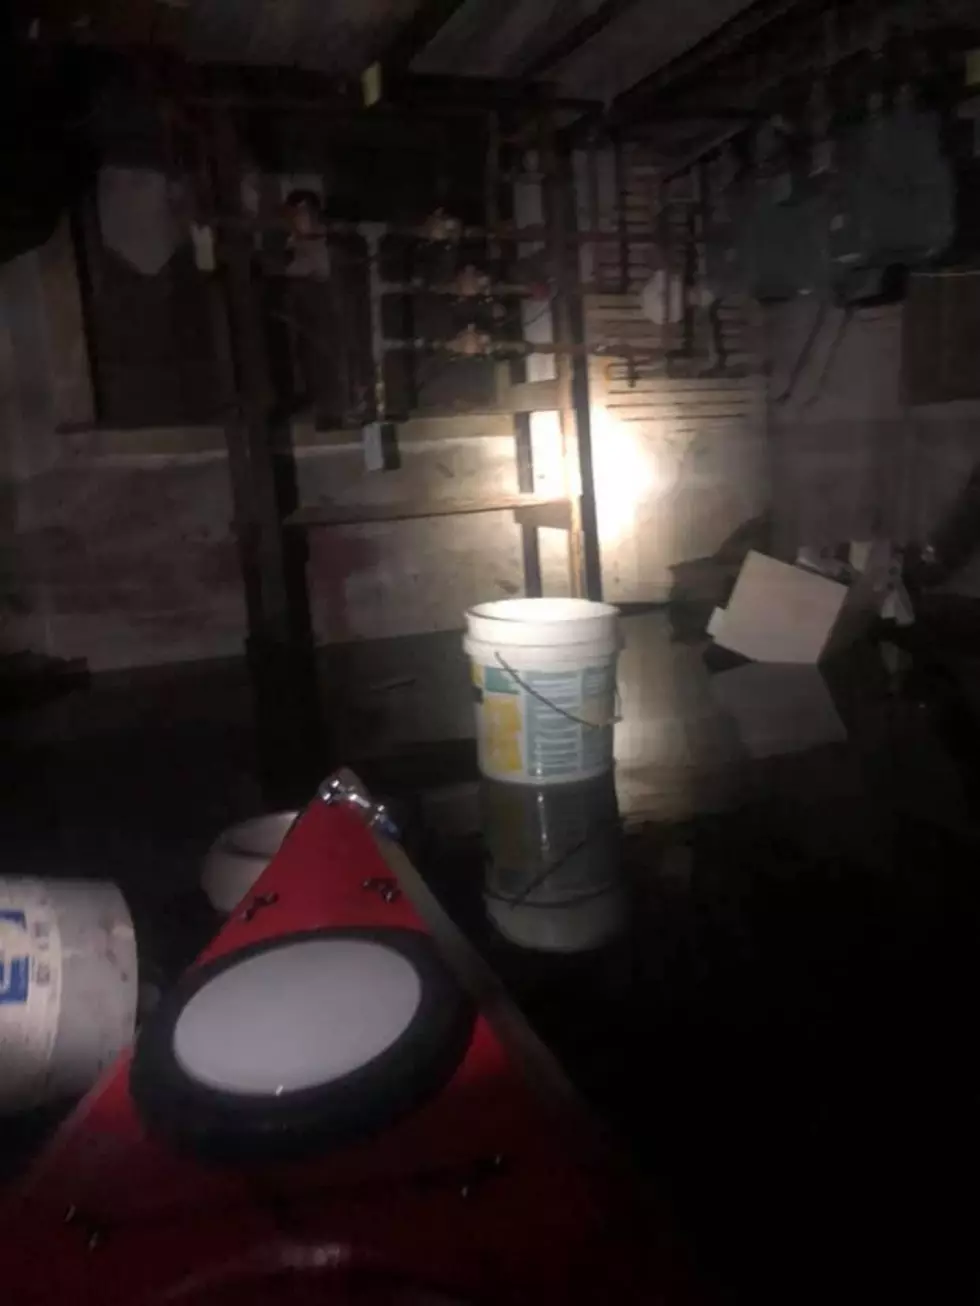 Plumber Has To Use Kayak To Find Valve In Basement [Video]